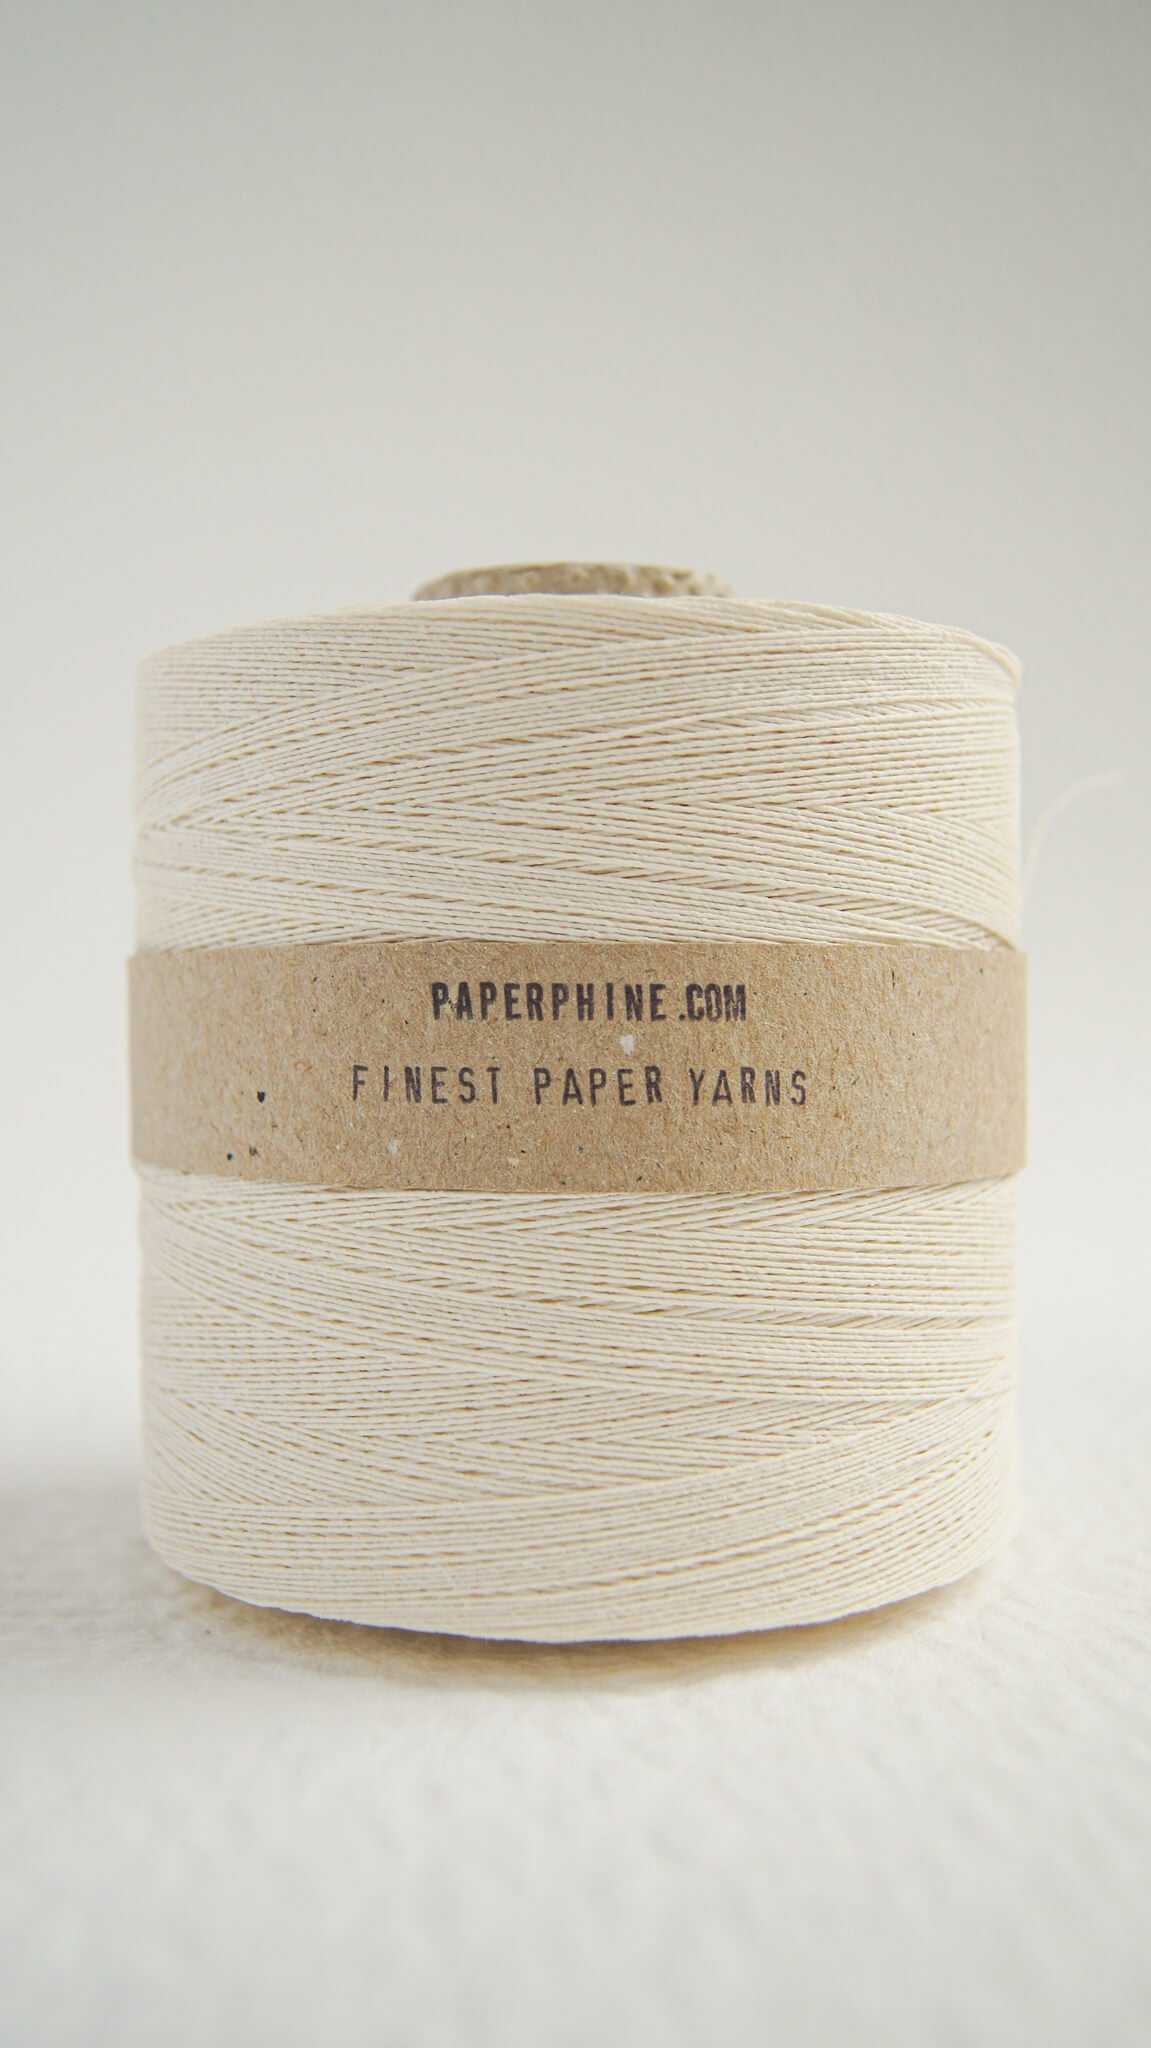 Fil de papier Paperphine - Finest paper yarn from Paperphine